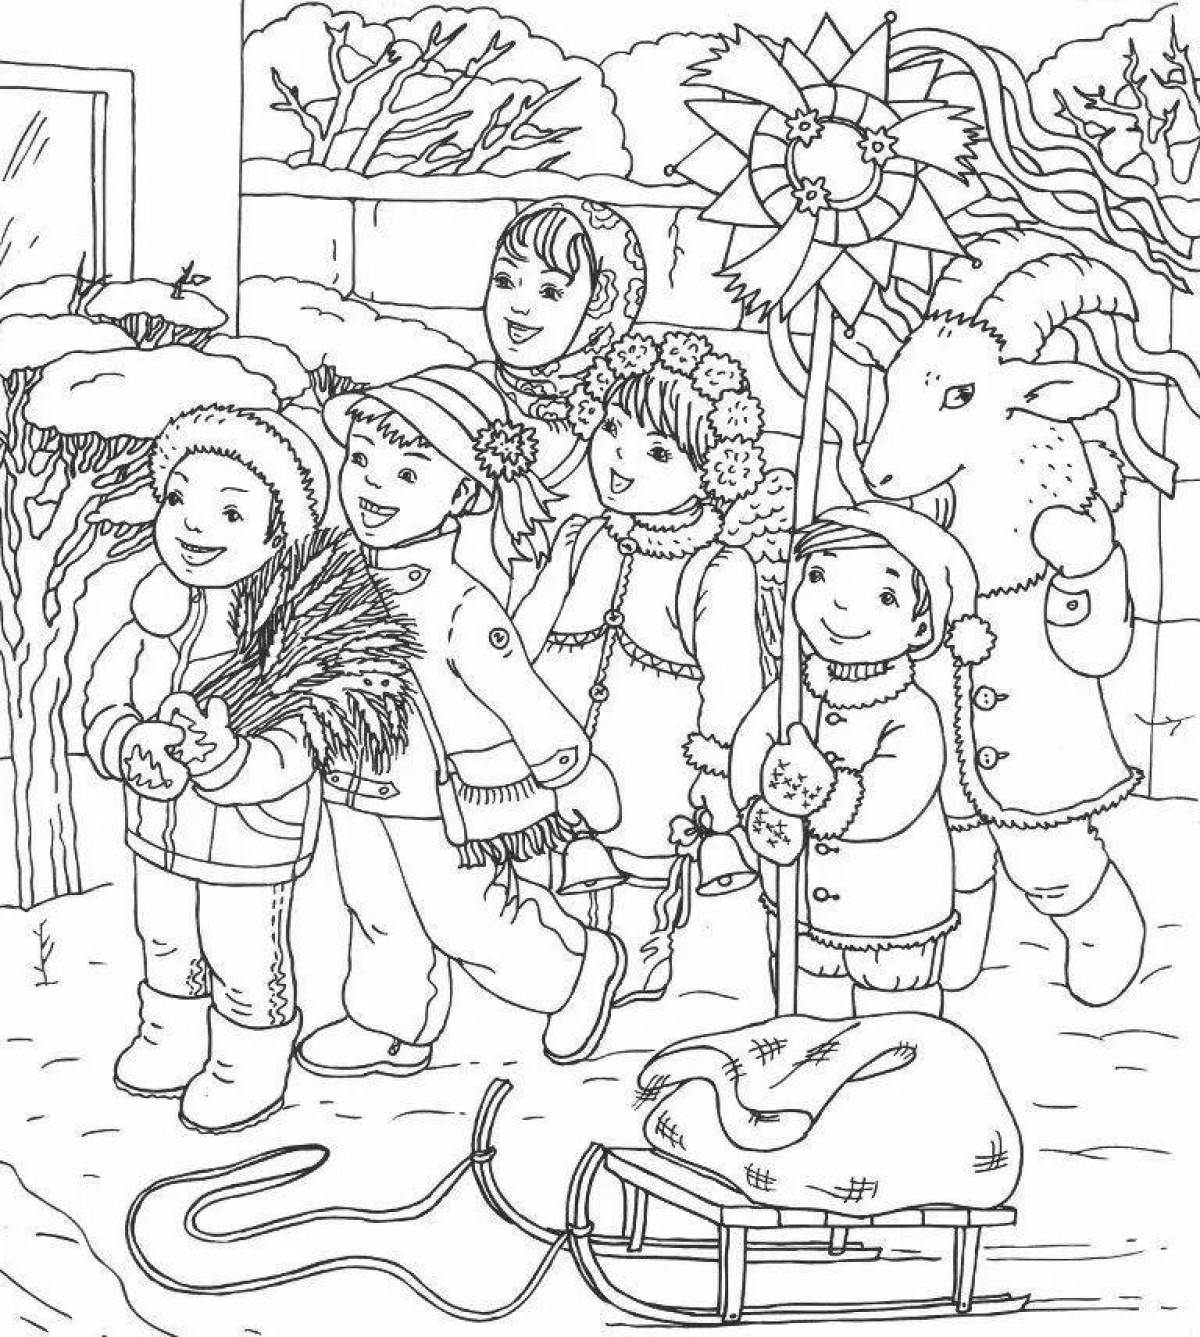 Colorful carol coloring page for kids